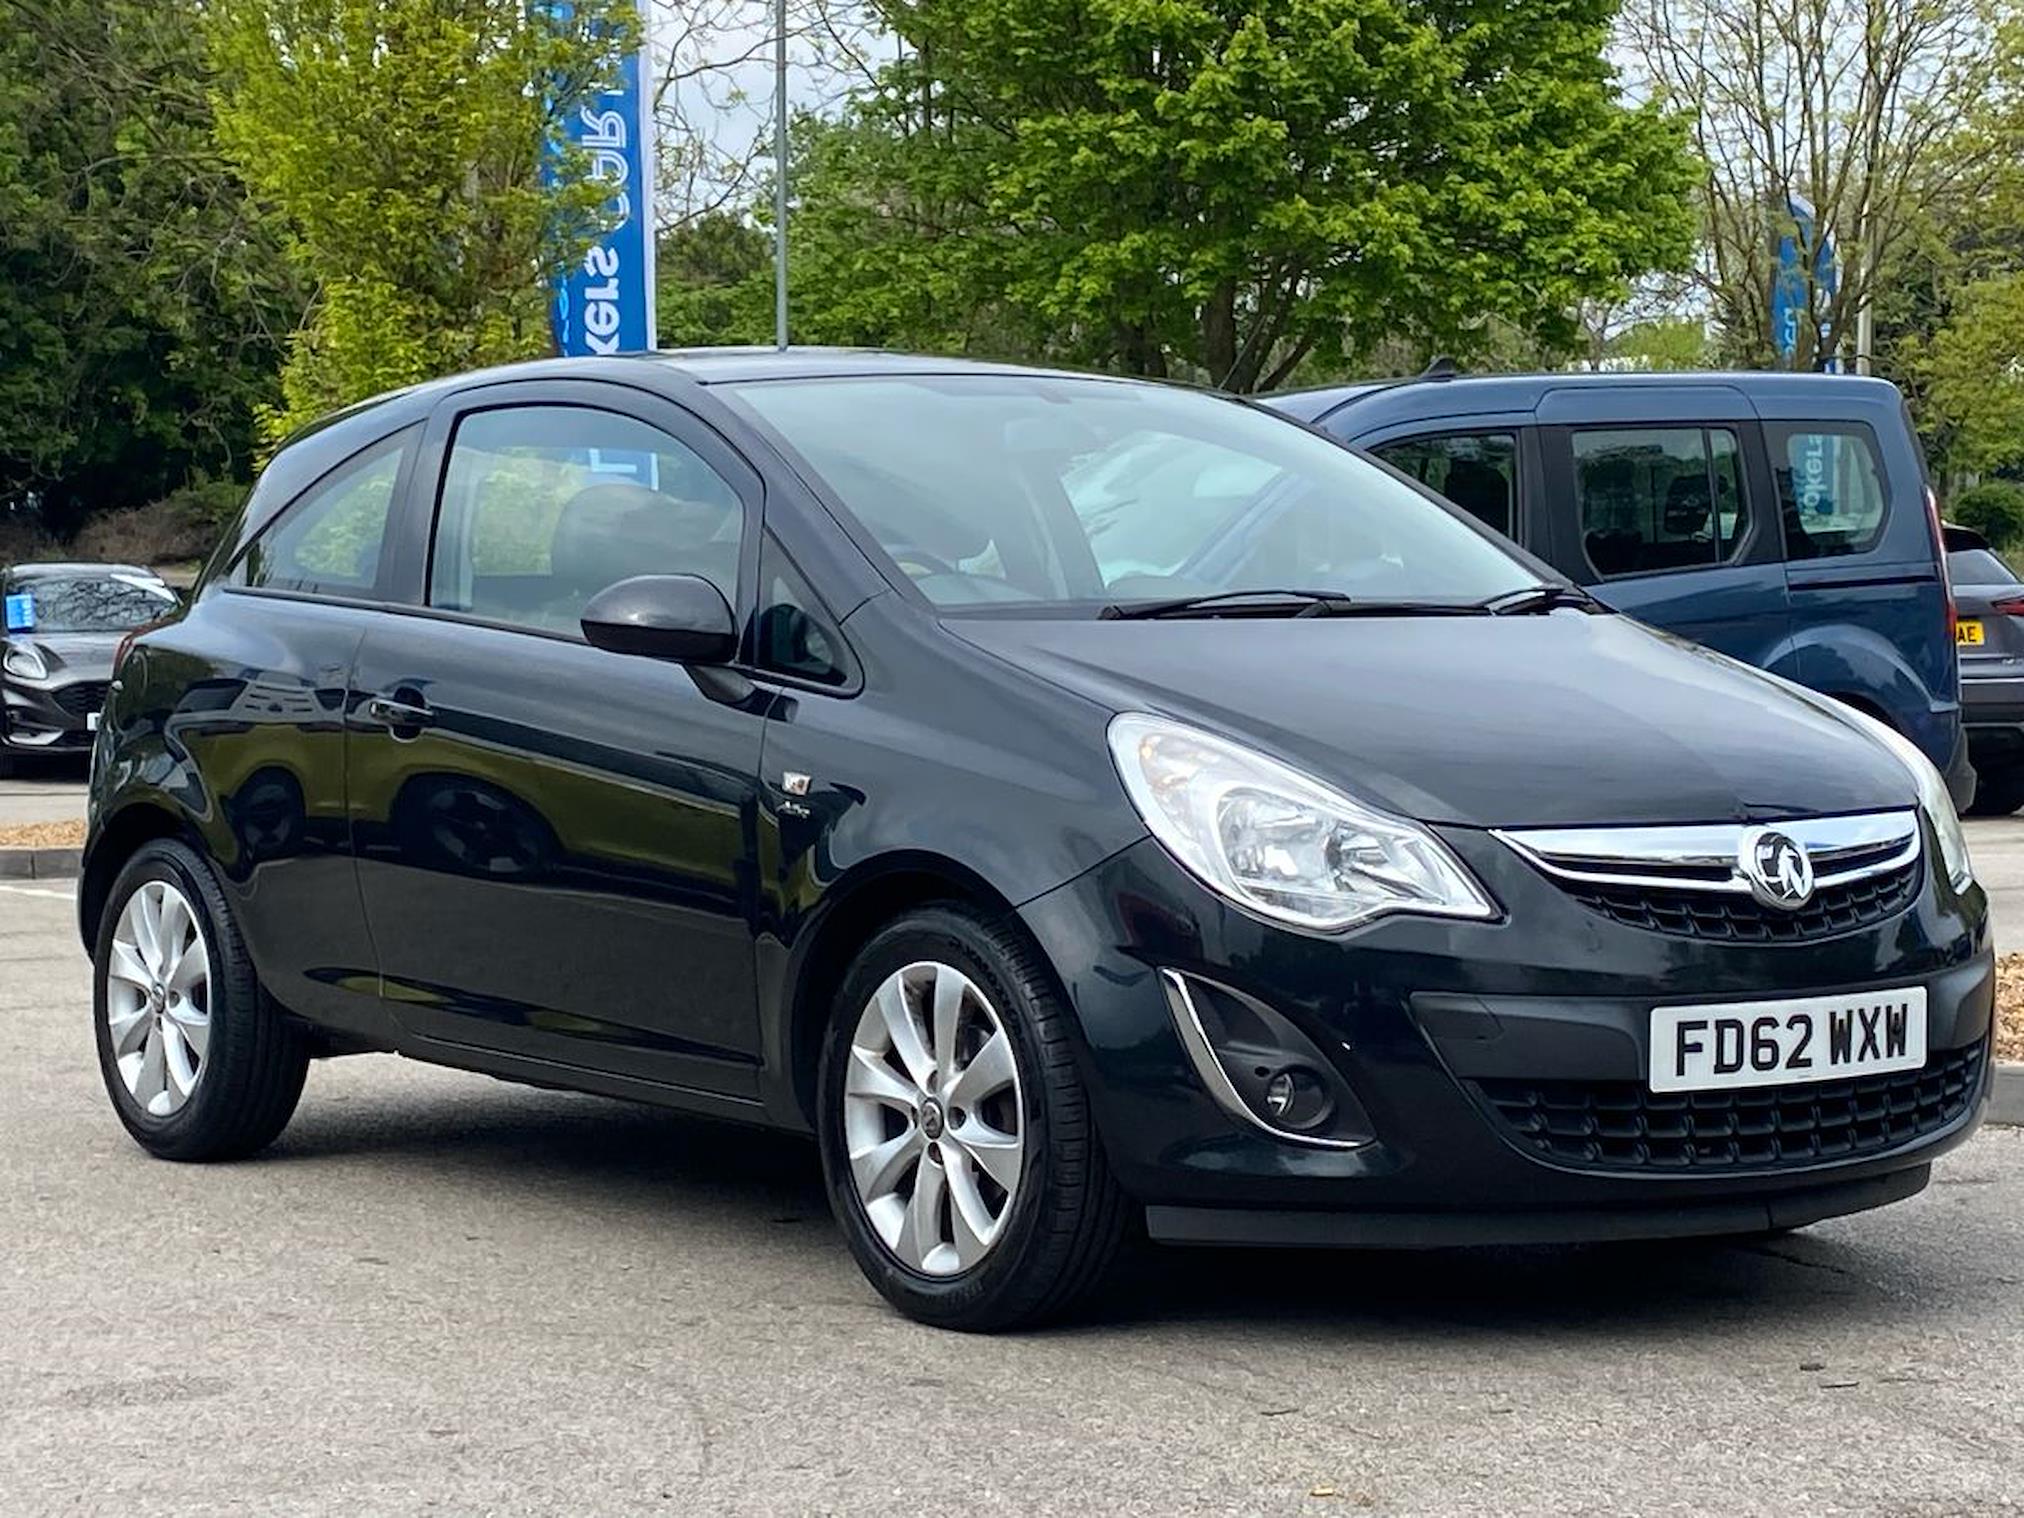 Used VAUXHALL CORSA 1.2 Active 3Dr [Ac] 2012